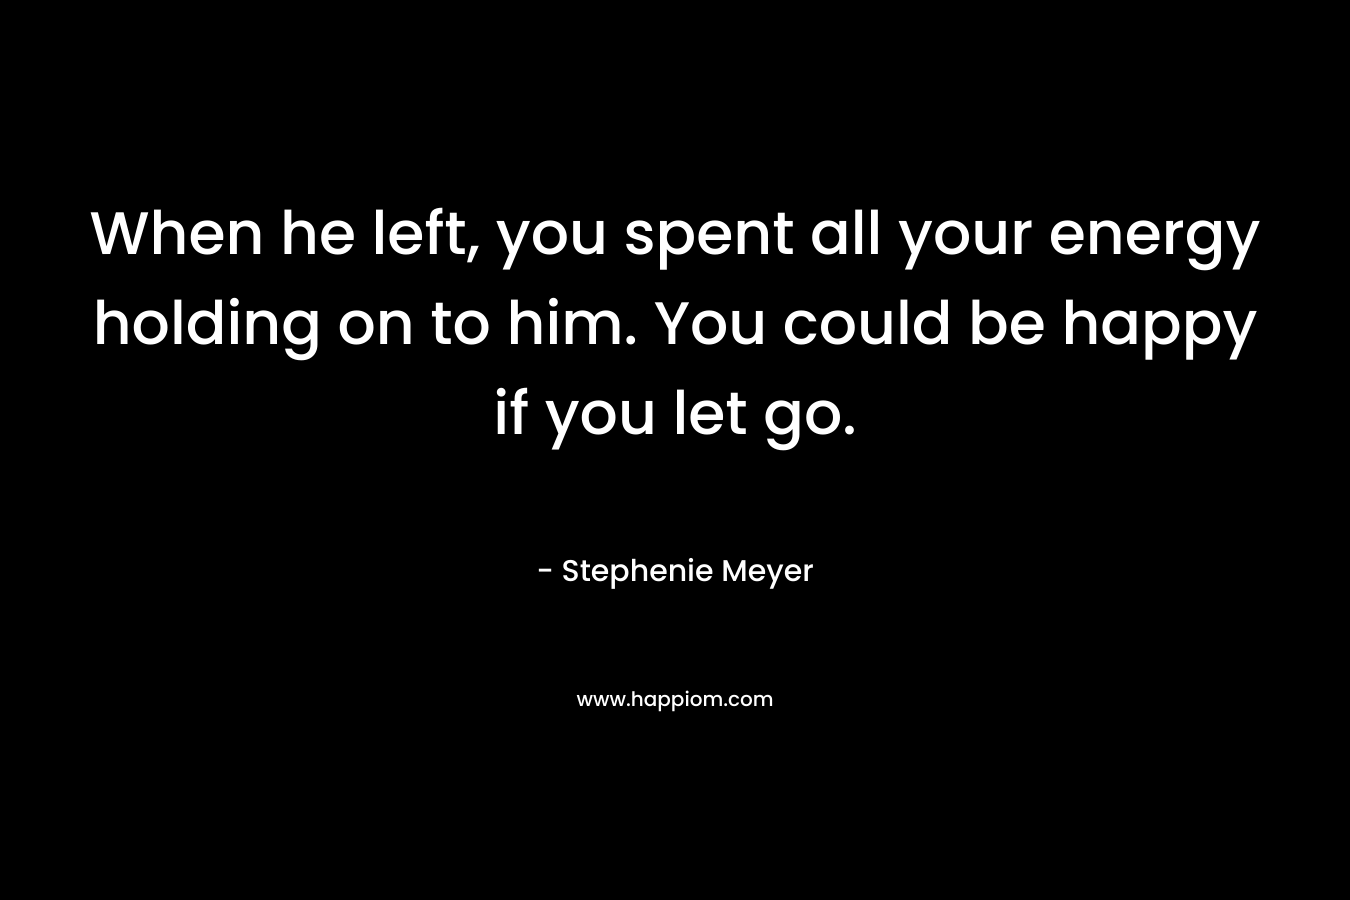 When he left, you spent all your energy holding on to him. You could be happy if you let go.